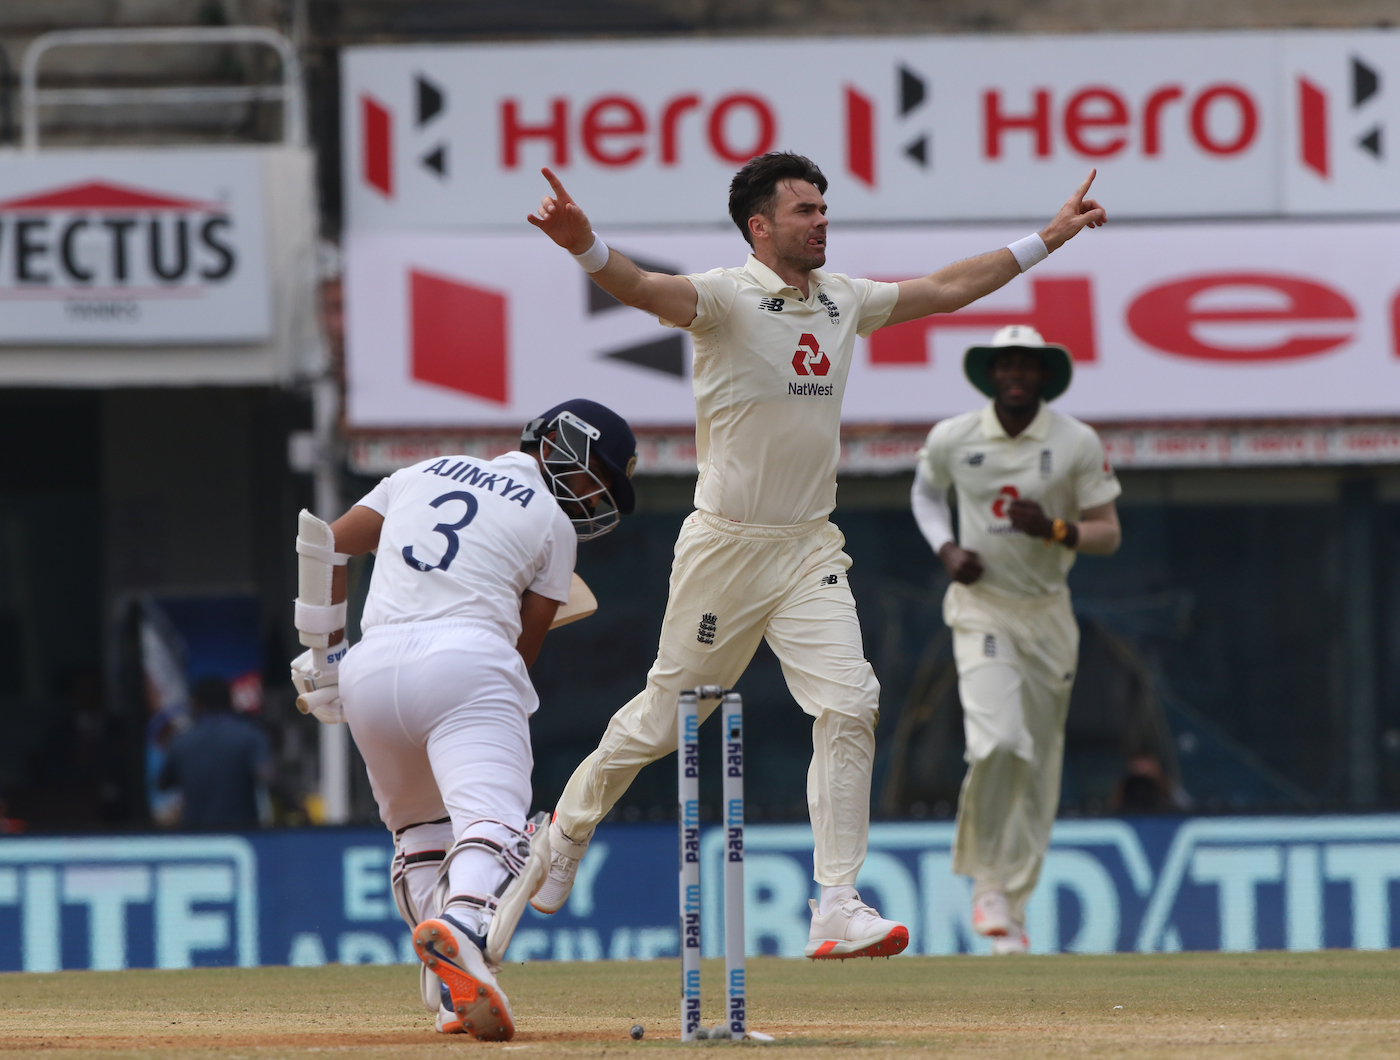 Ajinkya Rahane was dismissed for a duck by James Anderson | BCCI